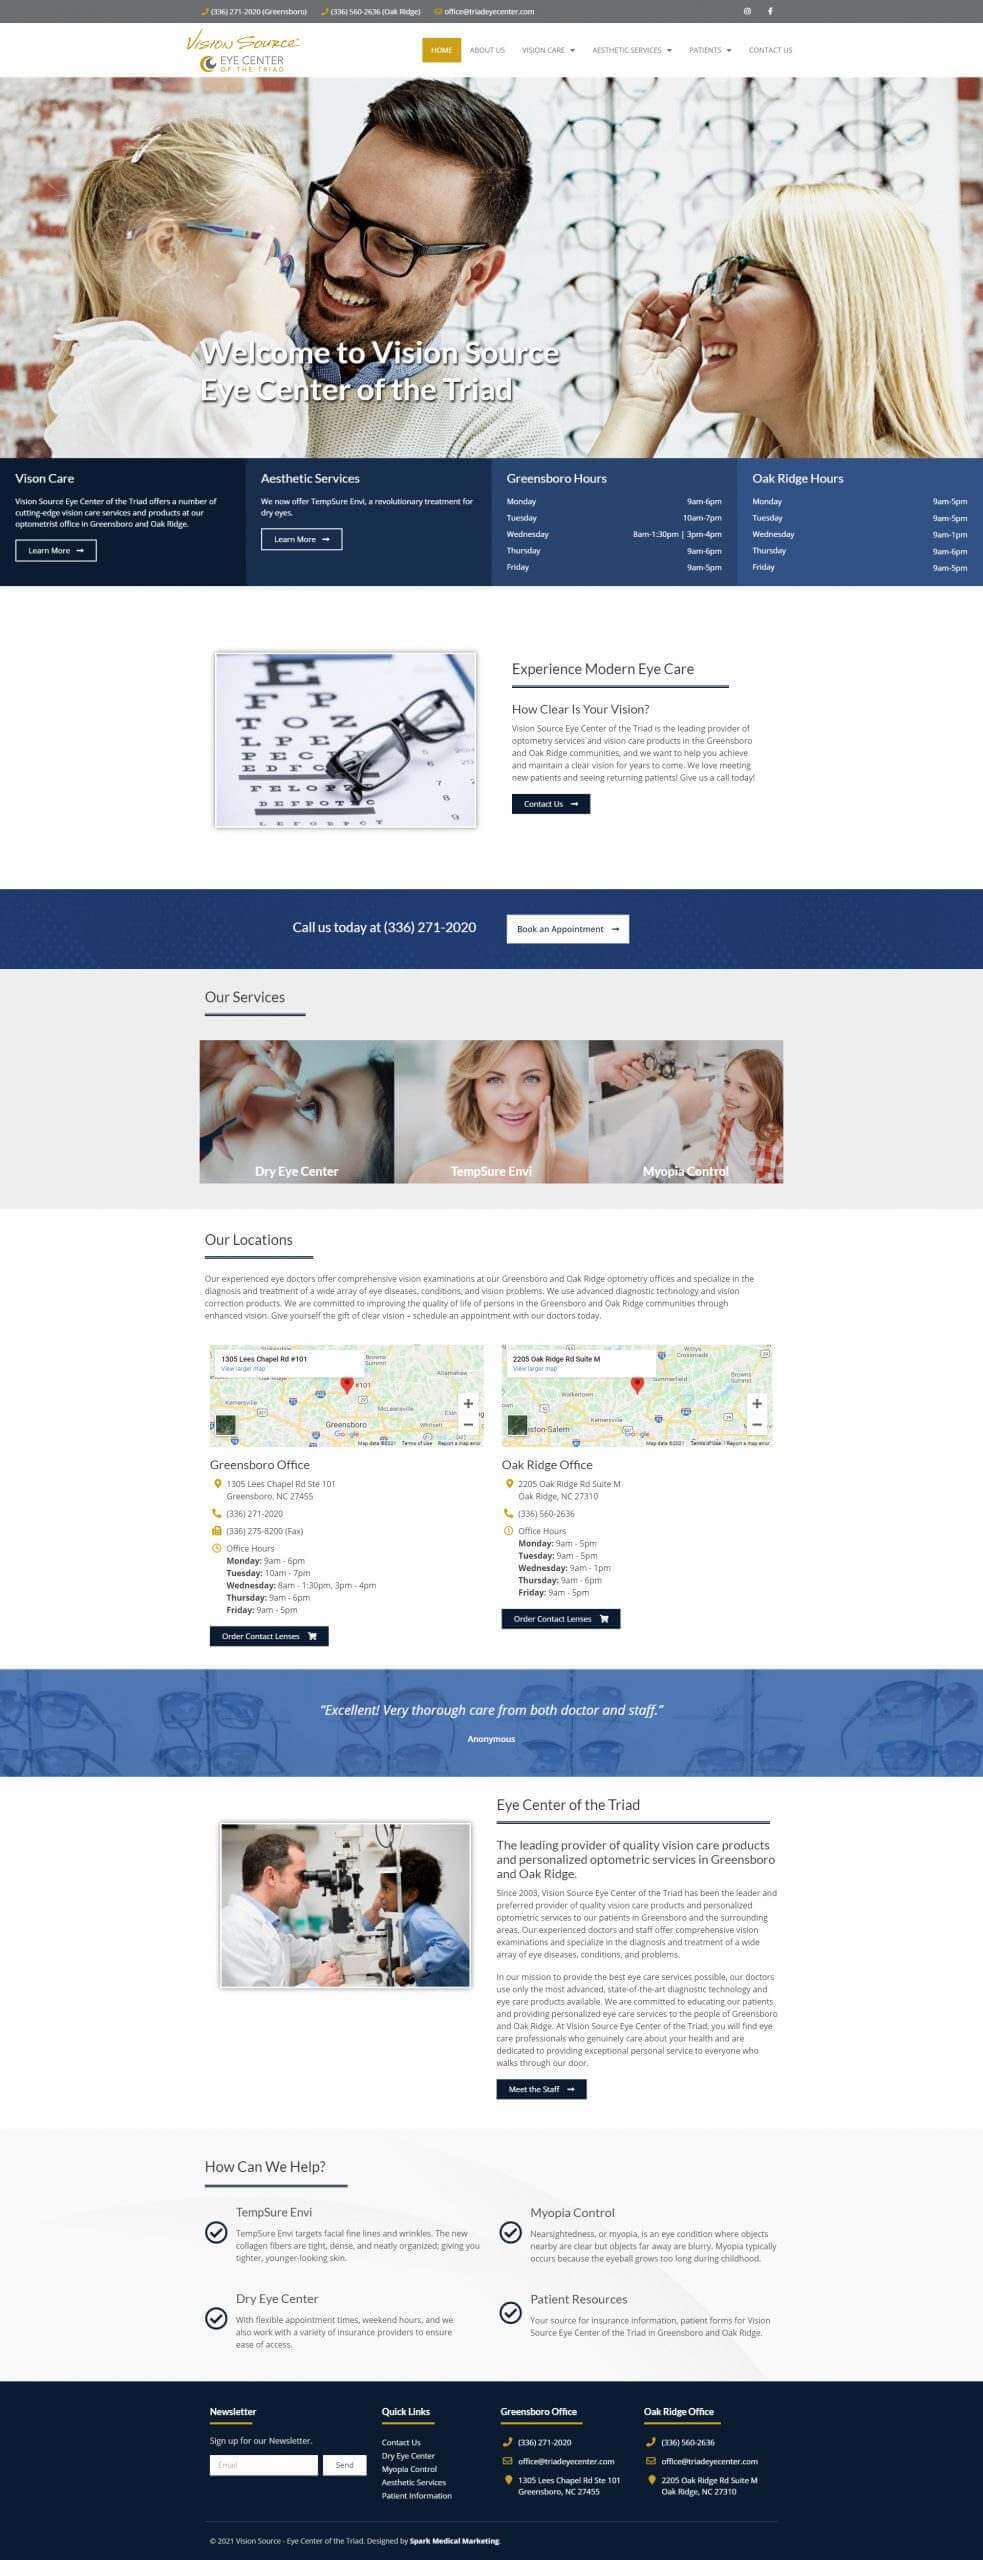 Vision Source - Eye Center of the Triad Homepage Screenshot